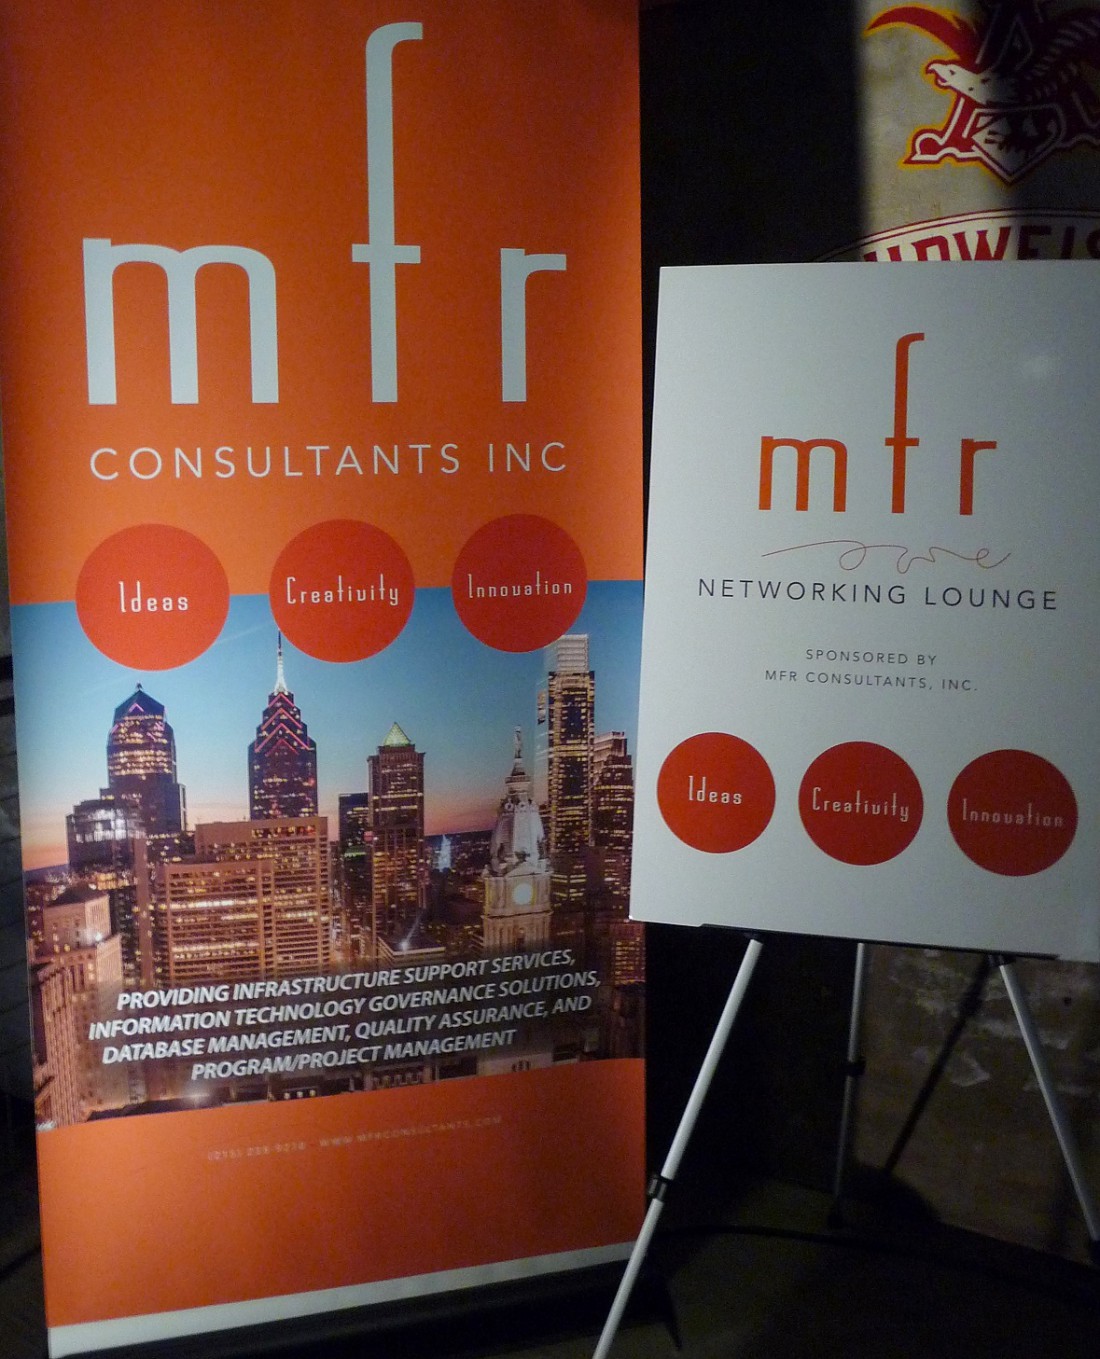 MFR consultants networking lounge from phorum philly 2016